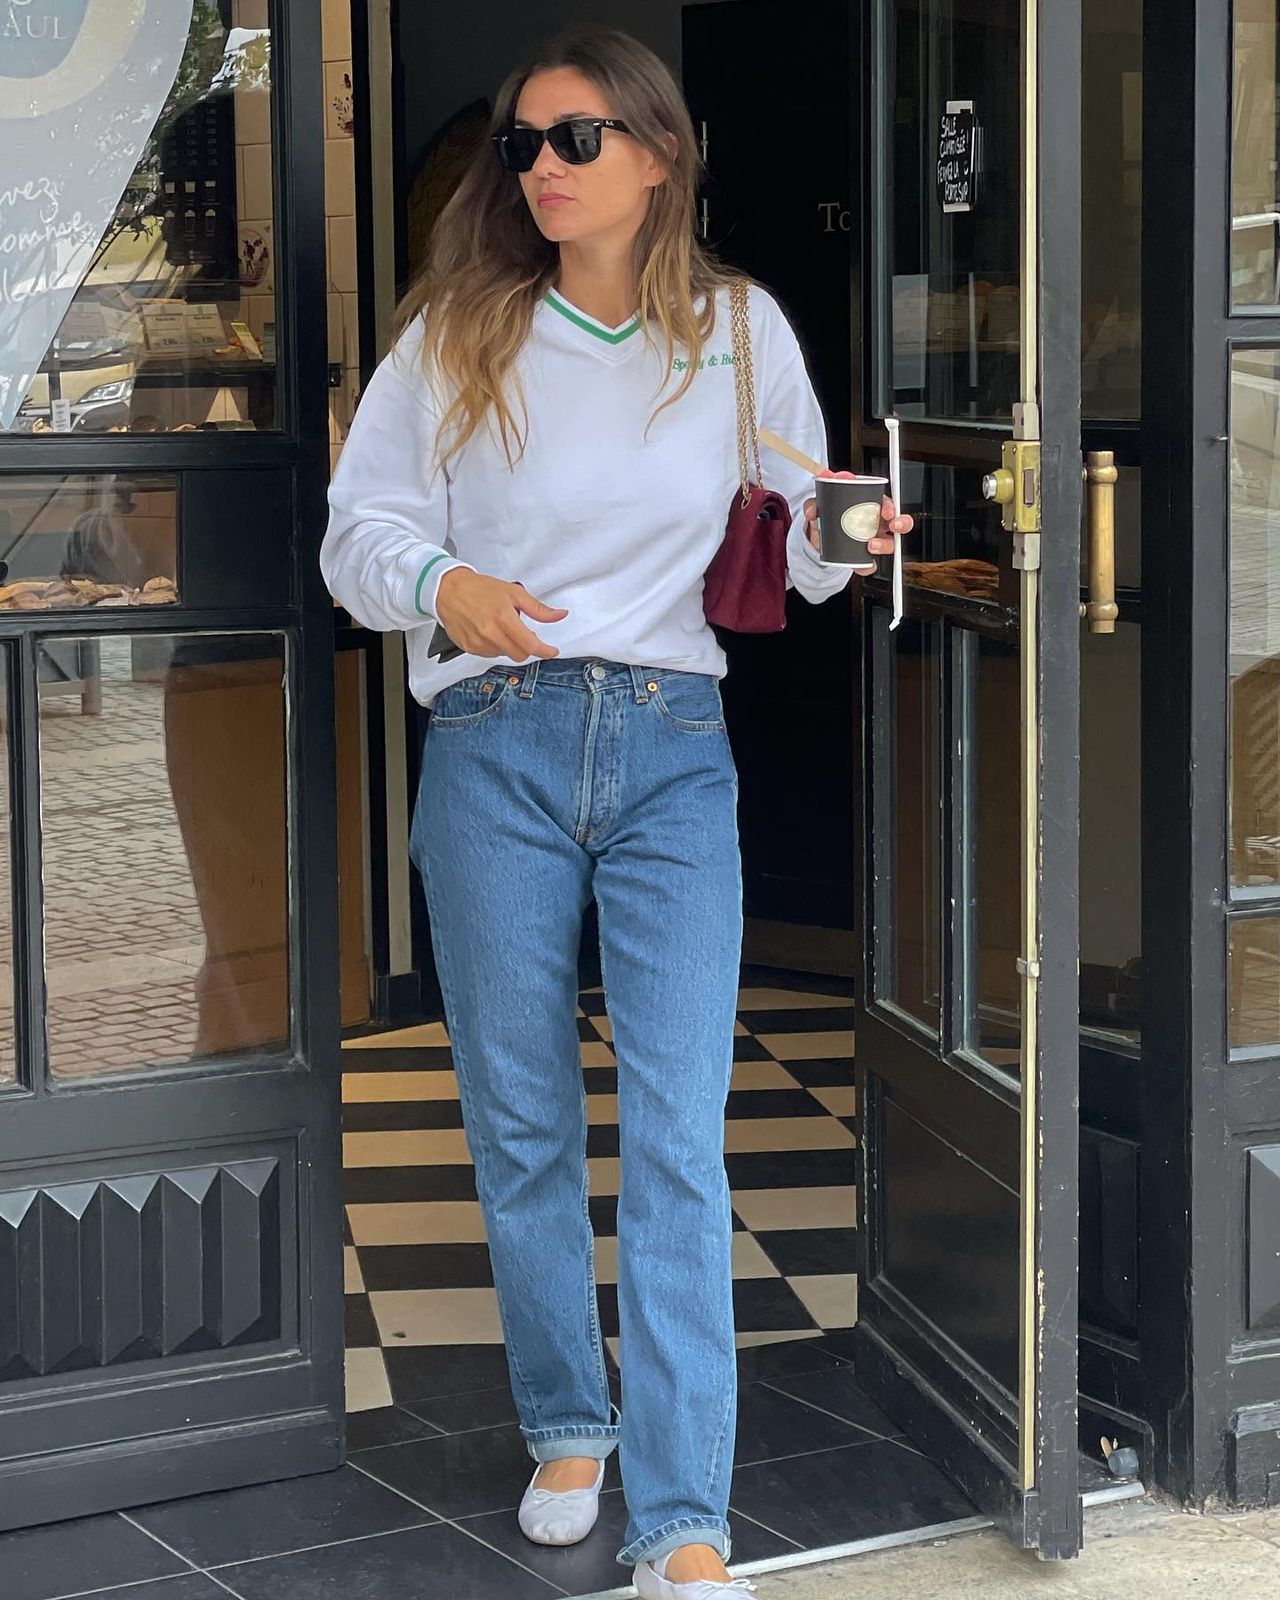 13 Stylish Outfit Ideas With Cuffed Jeans | Who What Wear